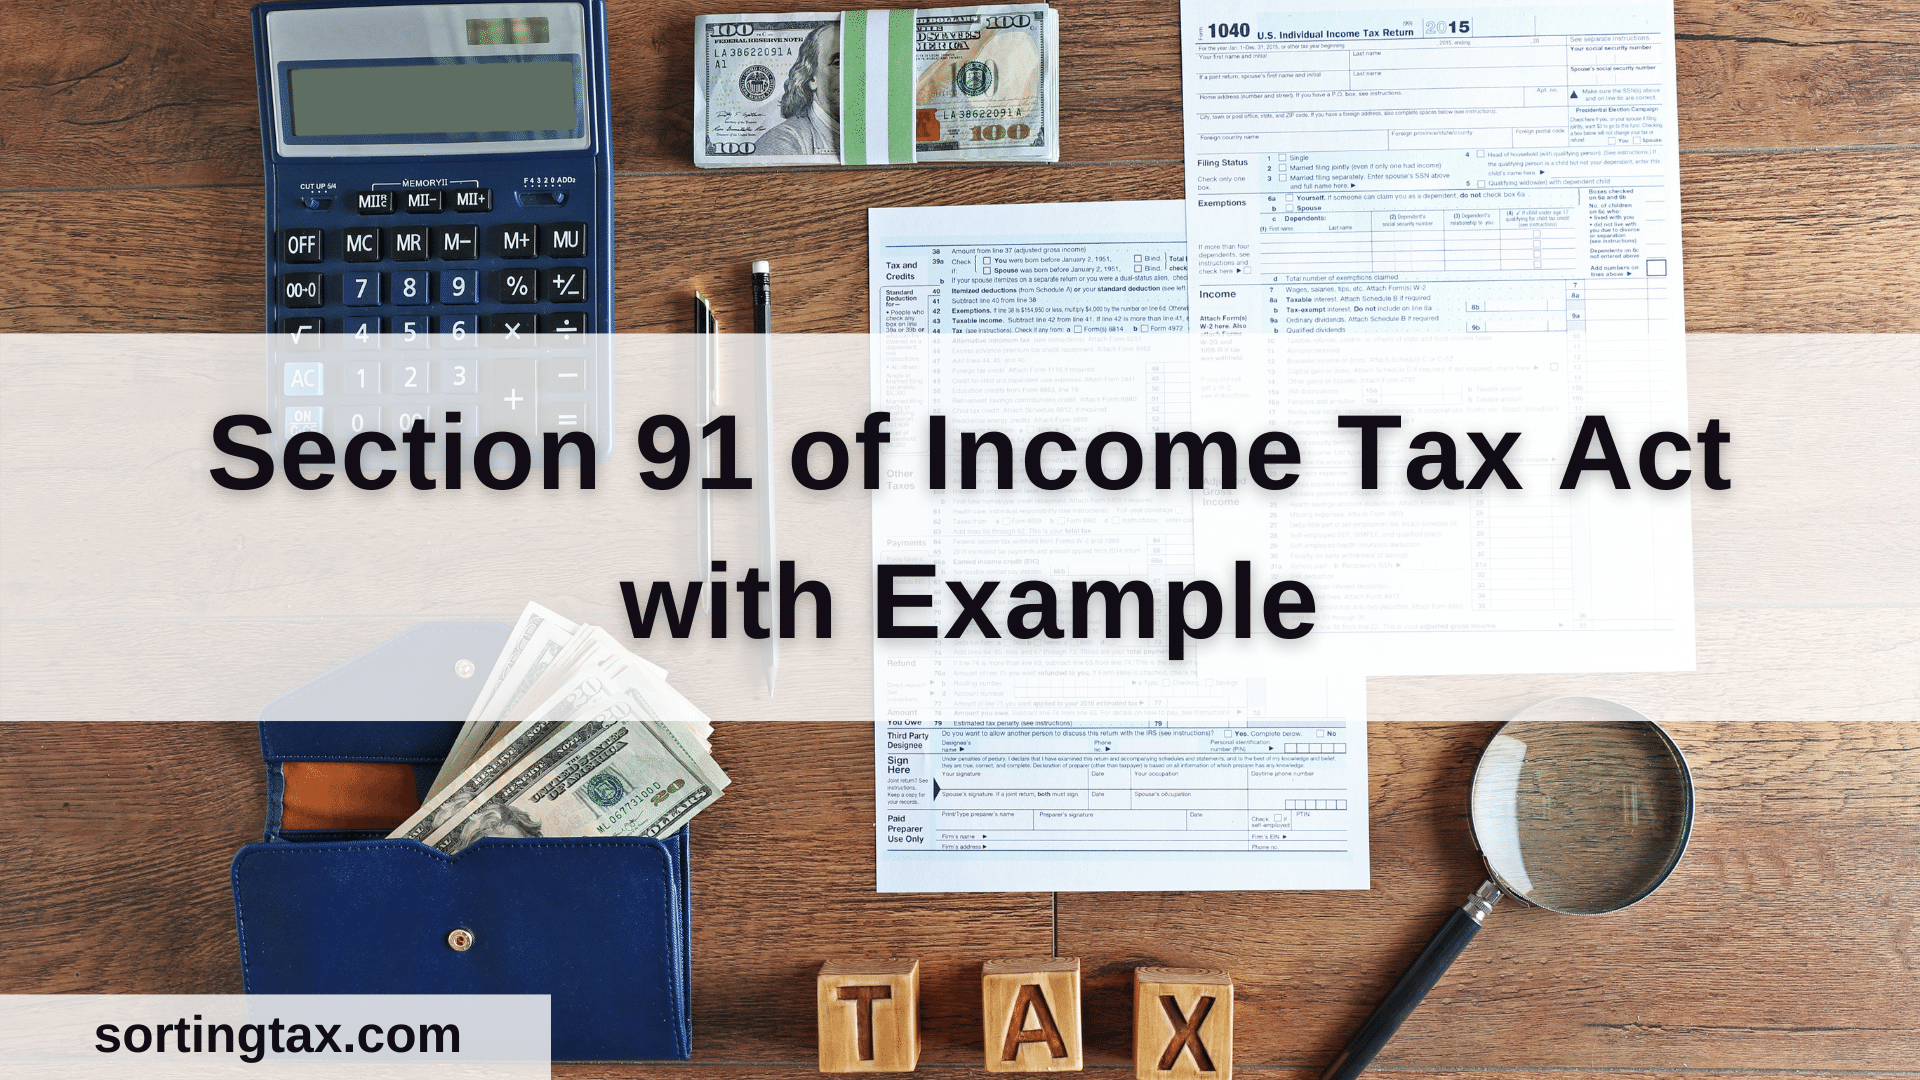 section-91-of-income-tax-act-with-example-sorting-tax